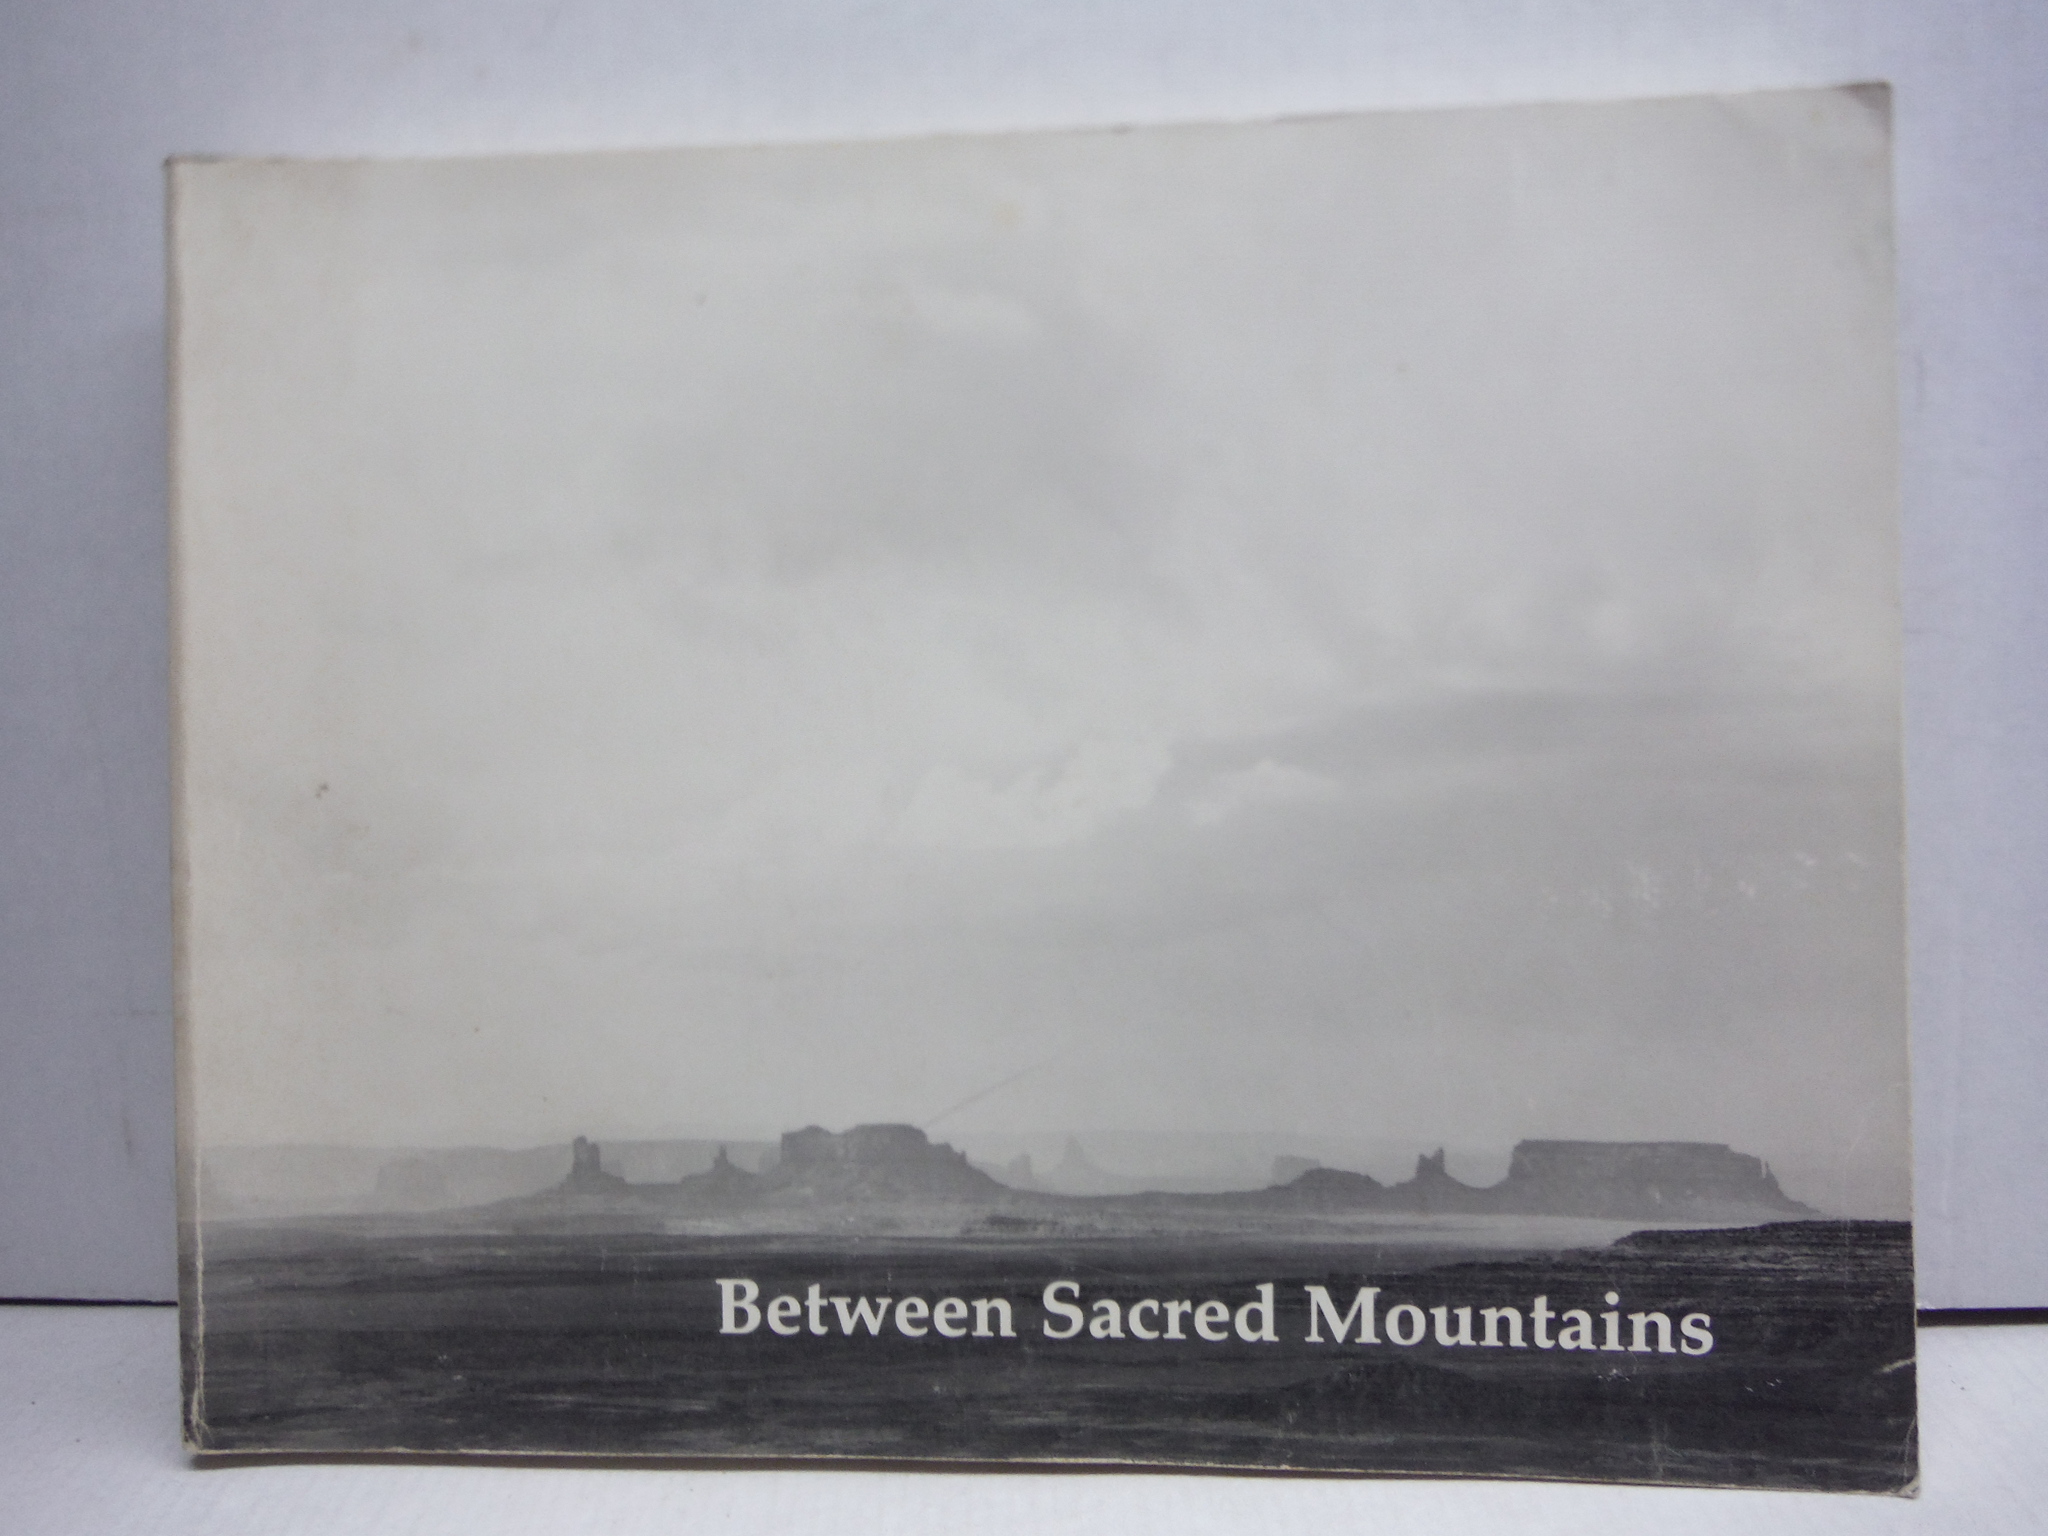 Between sacred mountains: Stories and lessons from the land